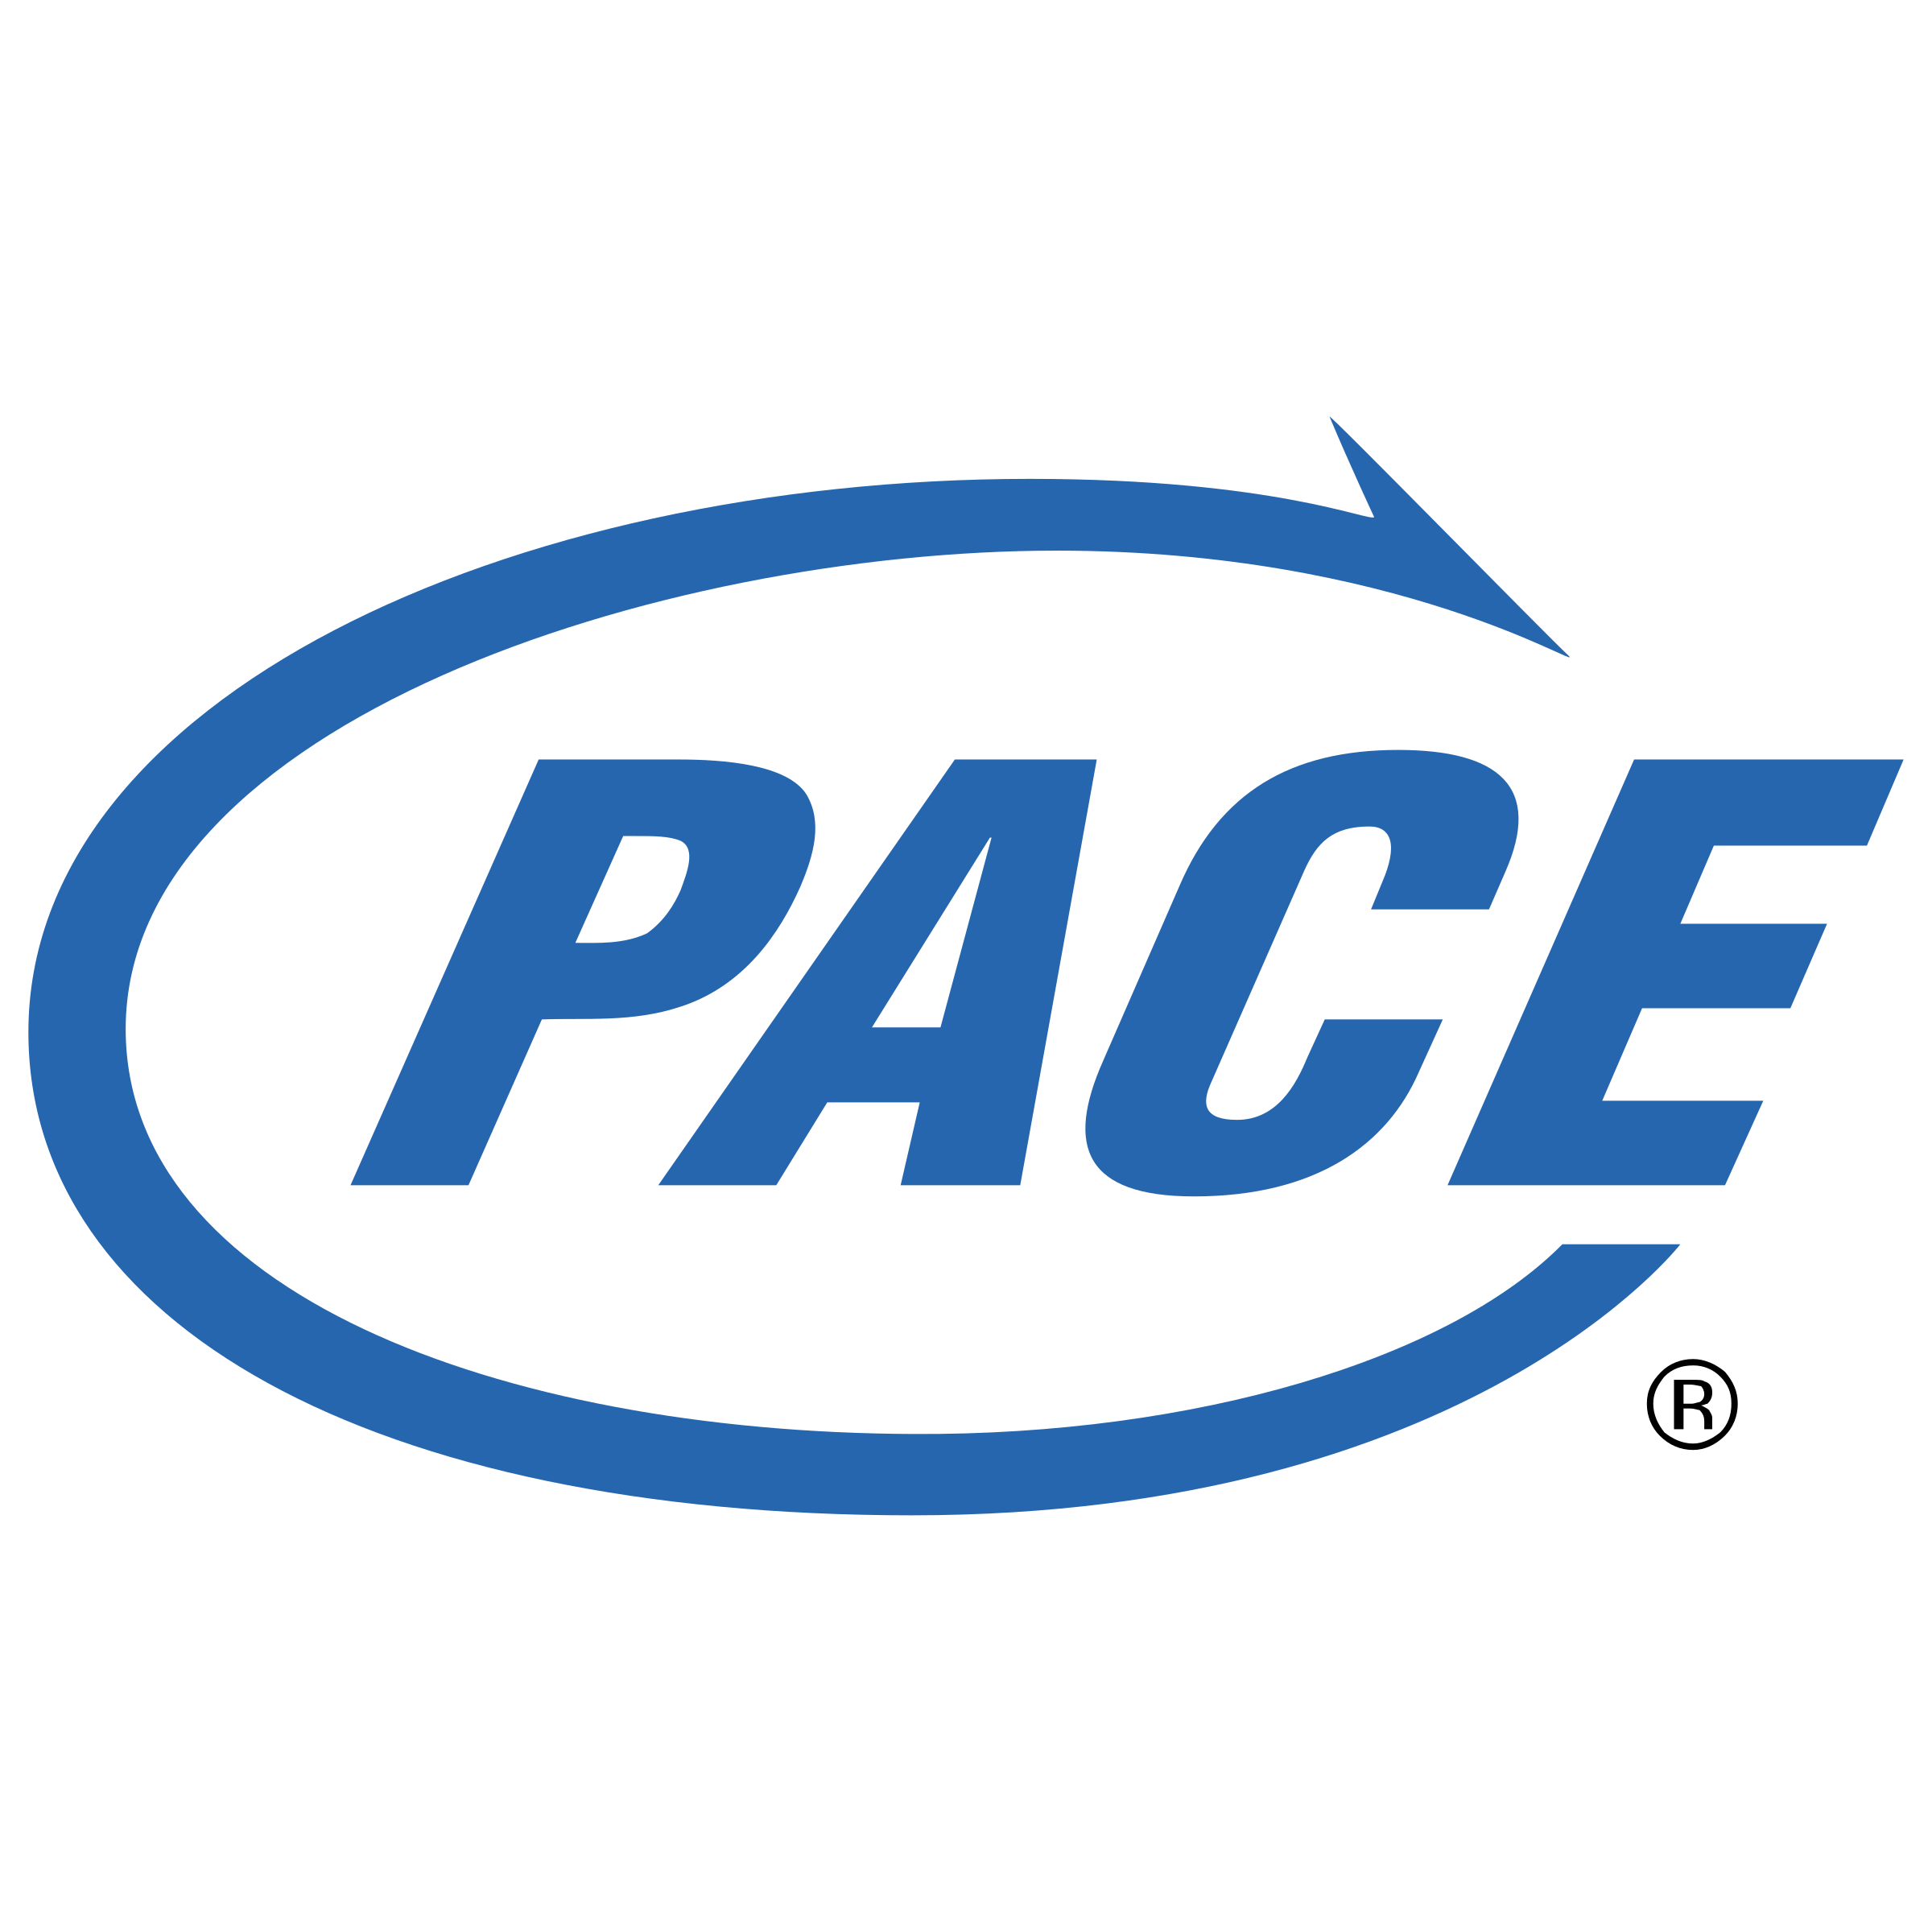 Pace Logo - Pace Logo PNG Transparent & SVG Vector - Freebie Supply